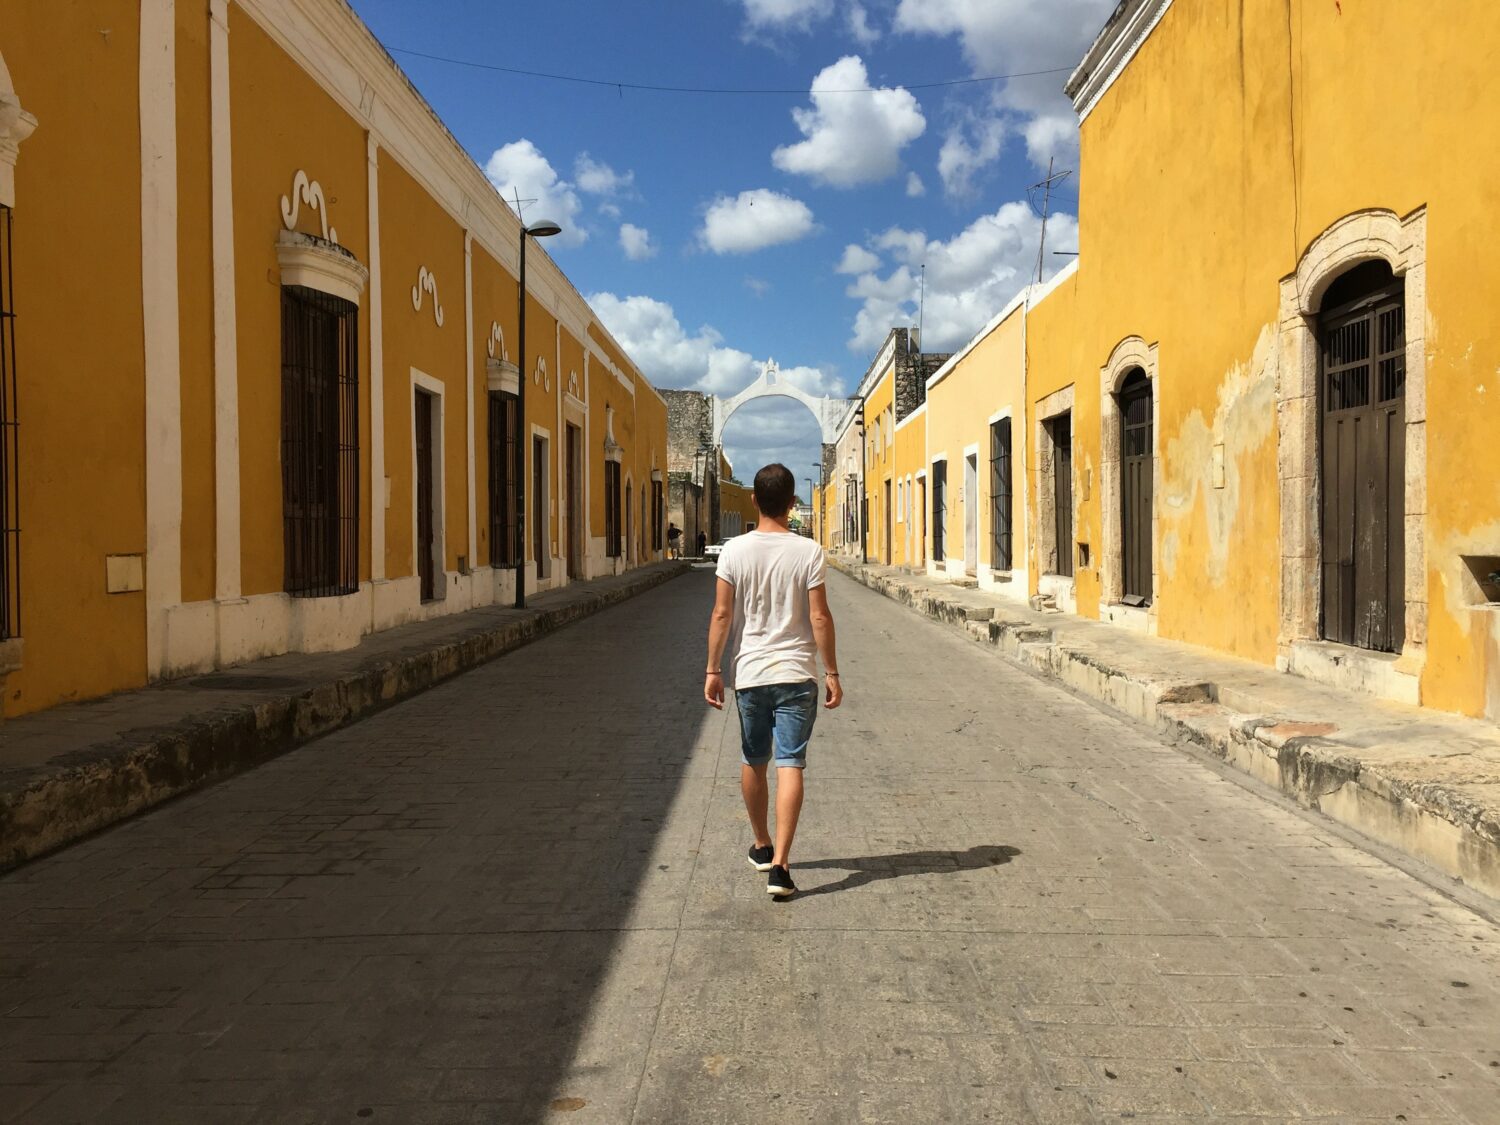 A male tourist walking down the street in Merida, Mexico